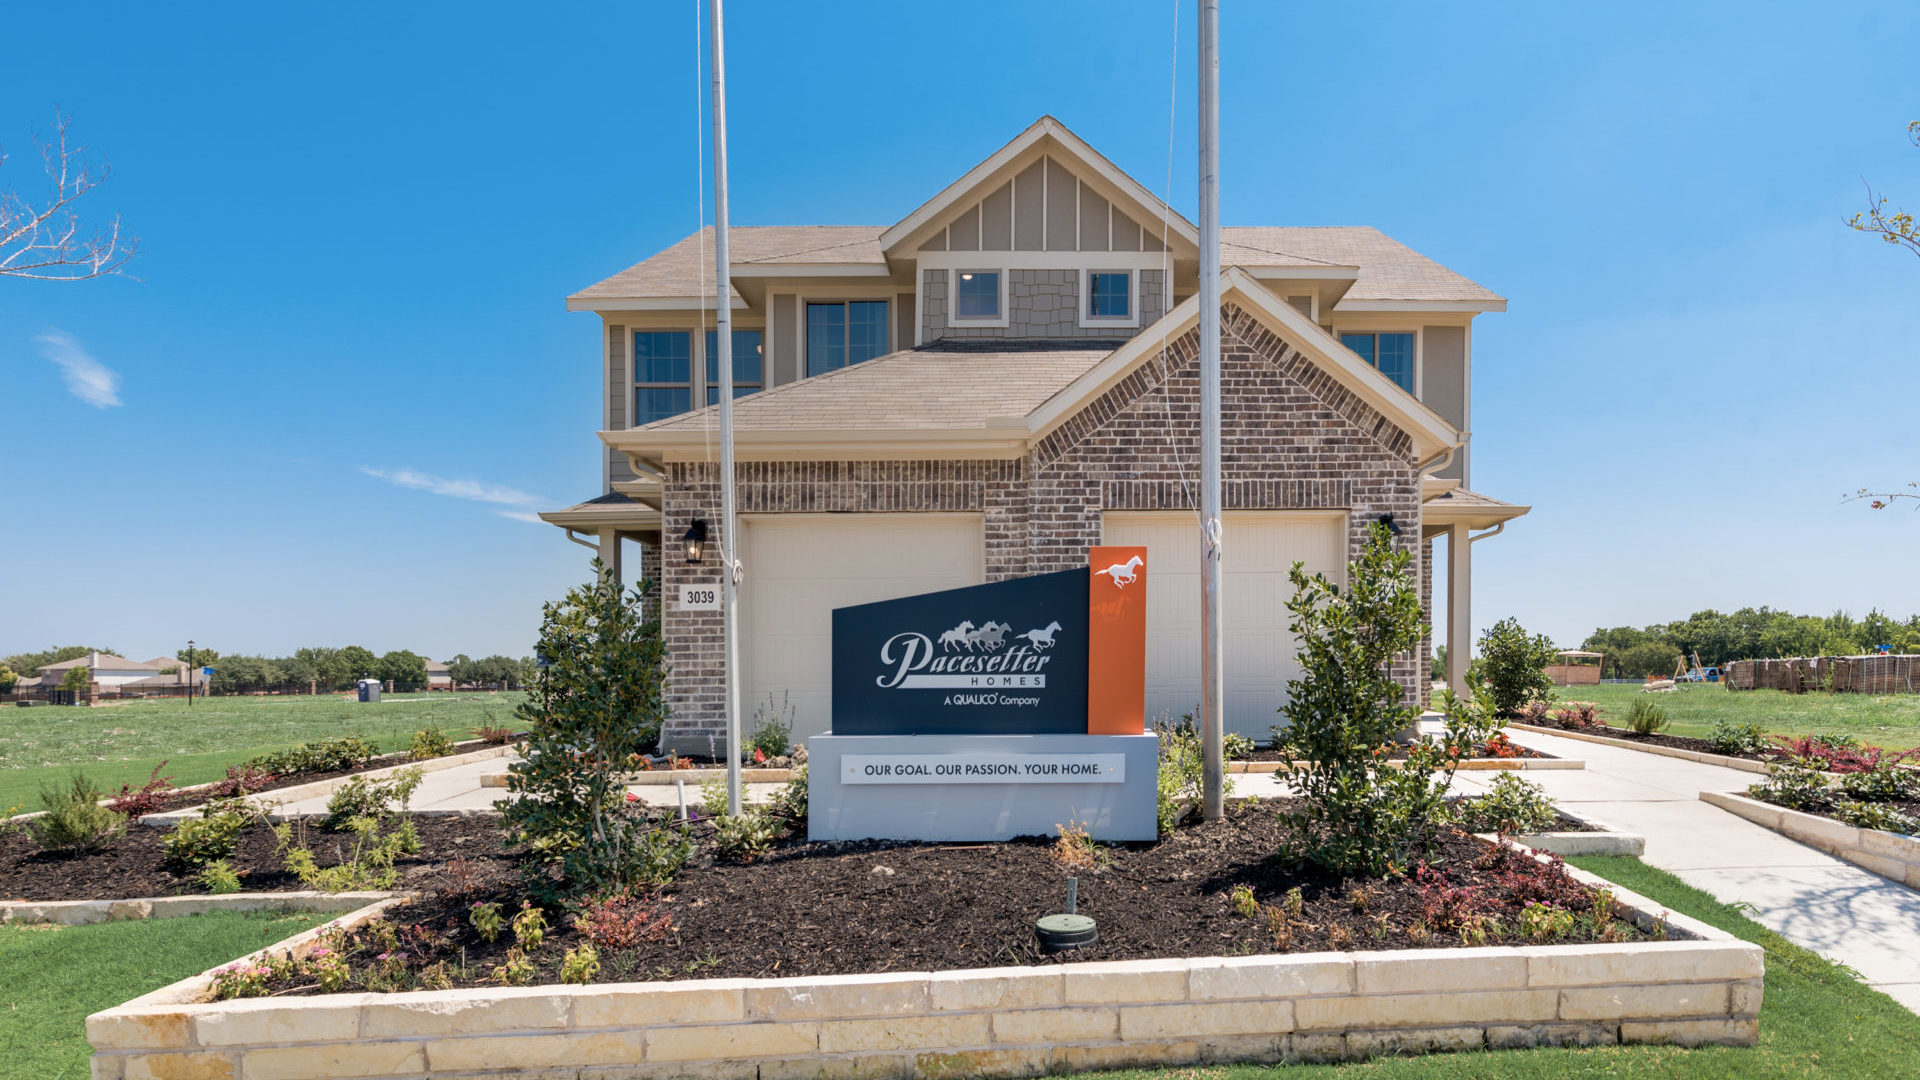  Lake Park Villas - New Model Now Open! New Homes in Wylie